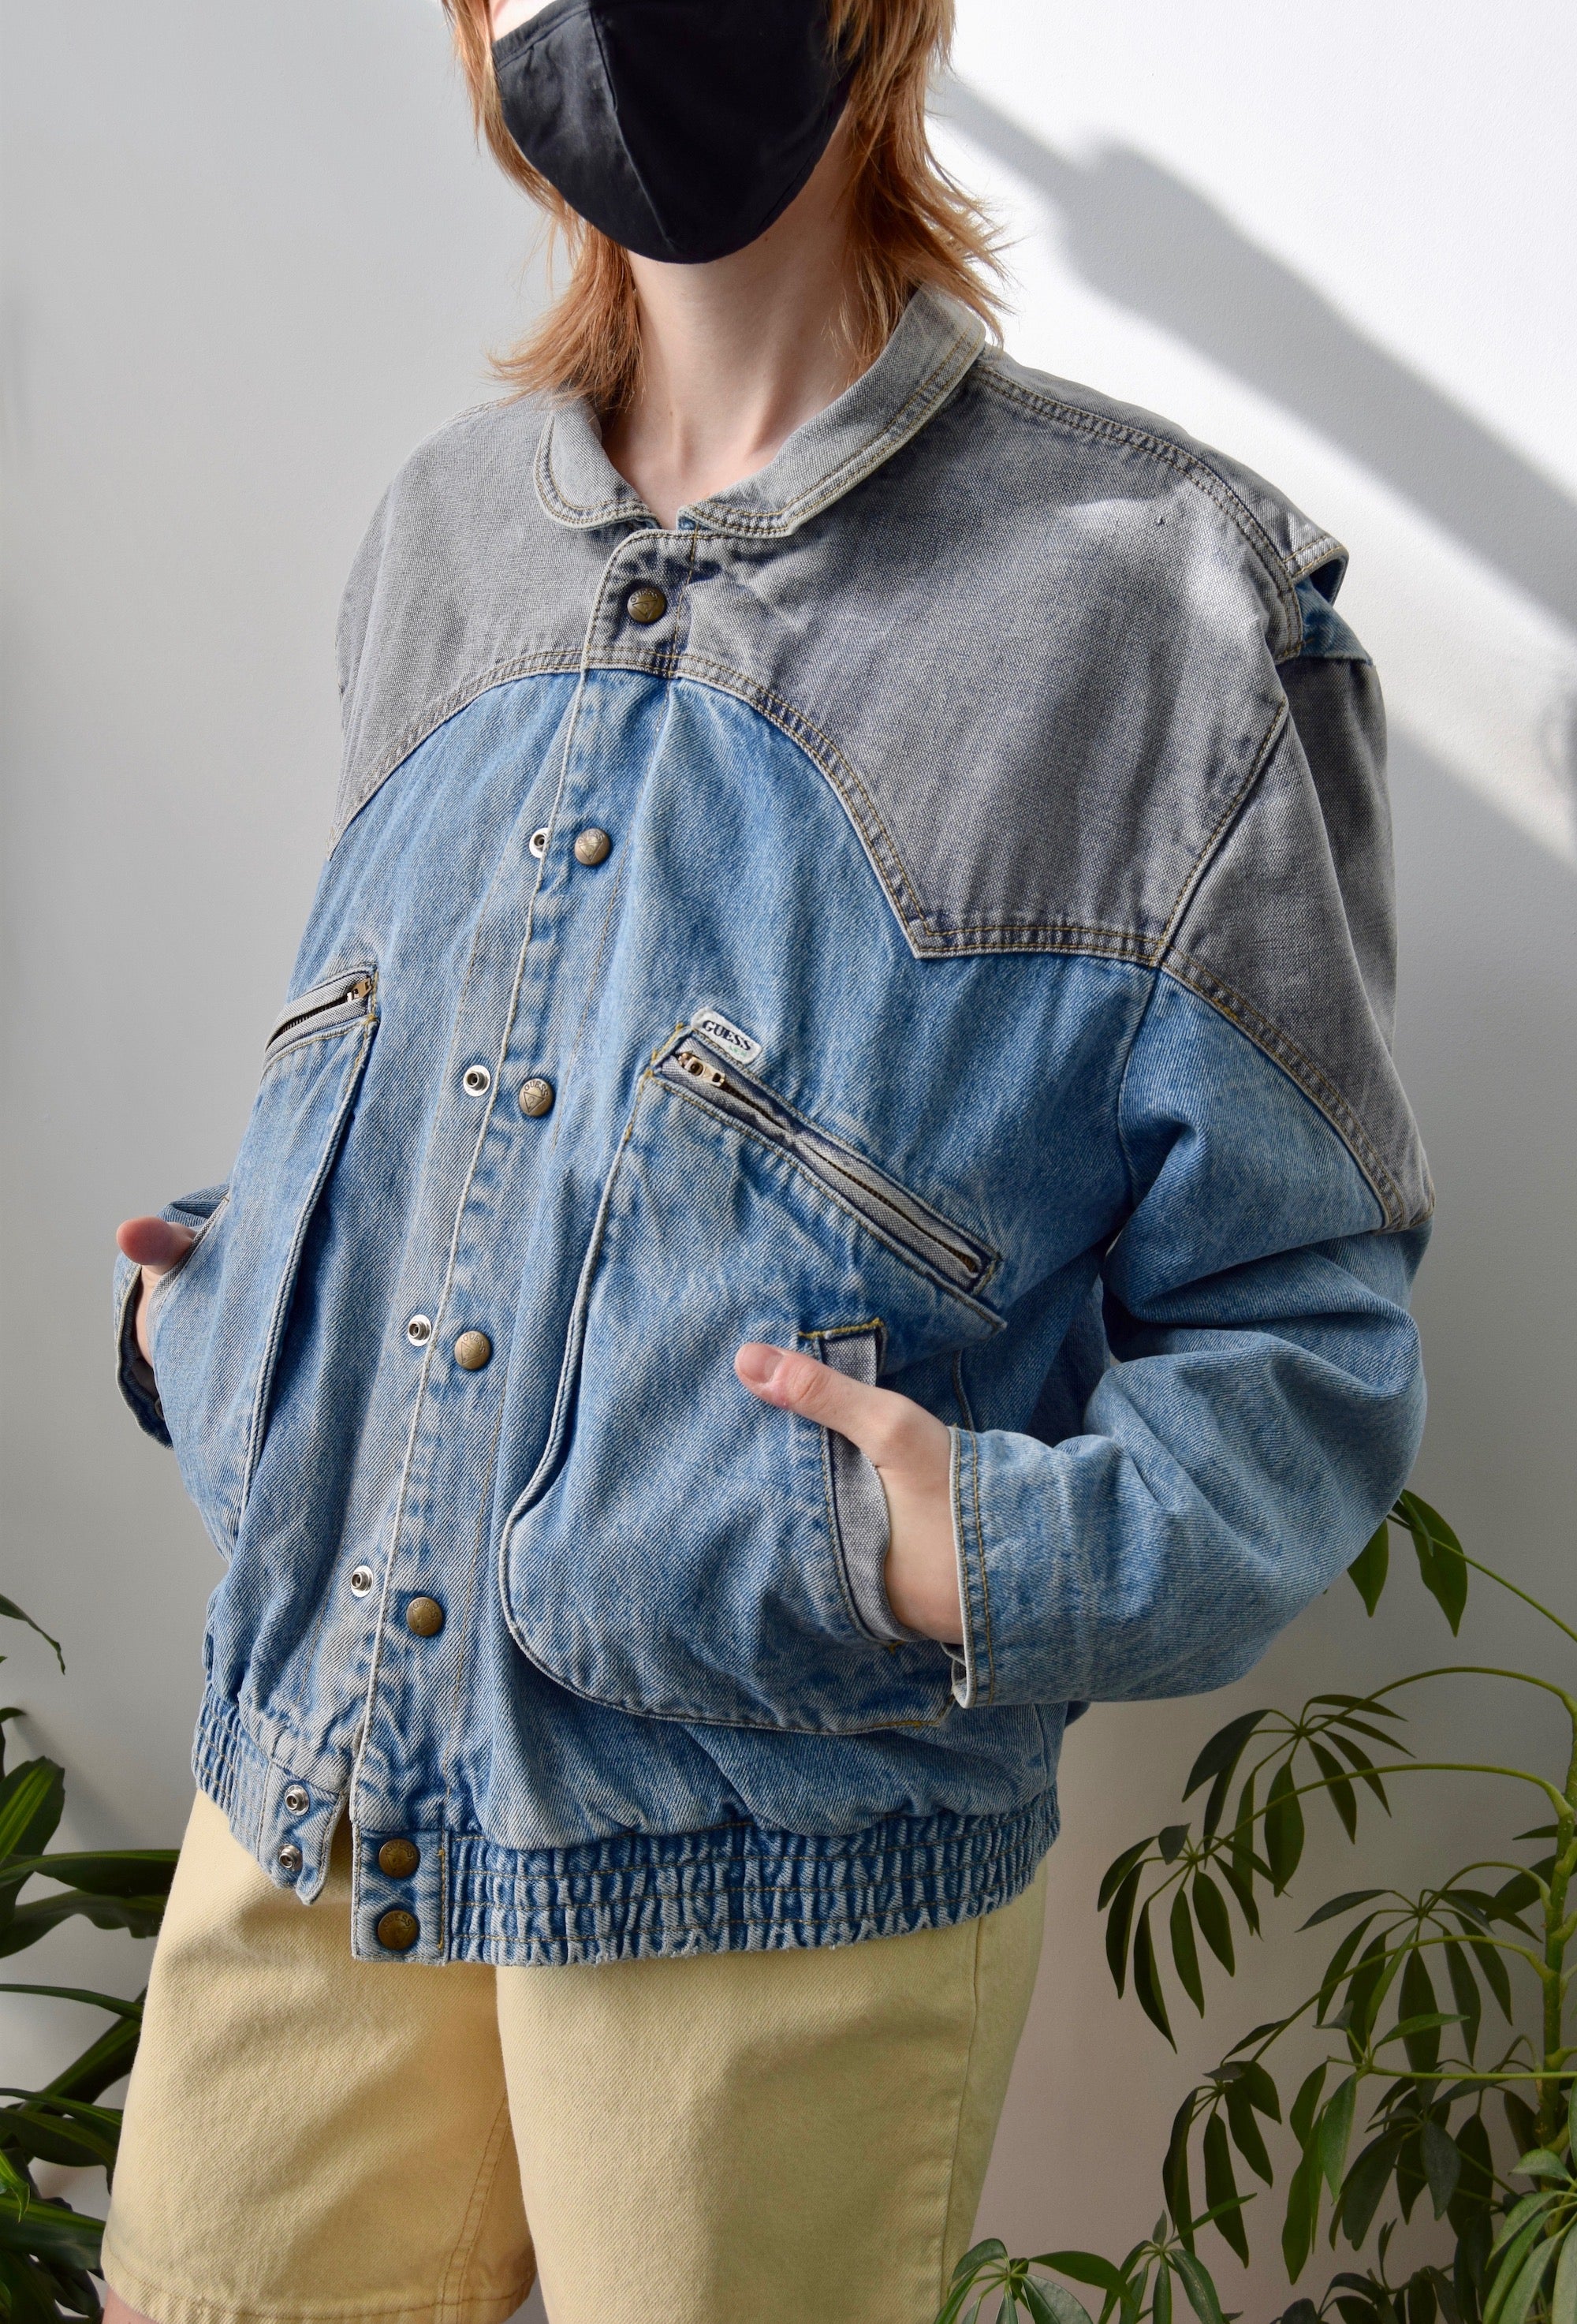 Eighties Guess "Marty McFly" Denim Bomber Jacket